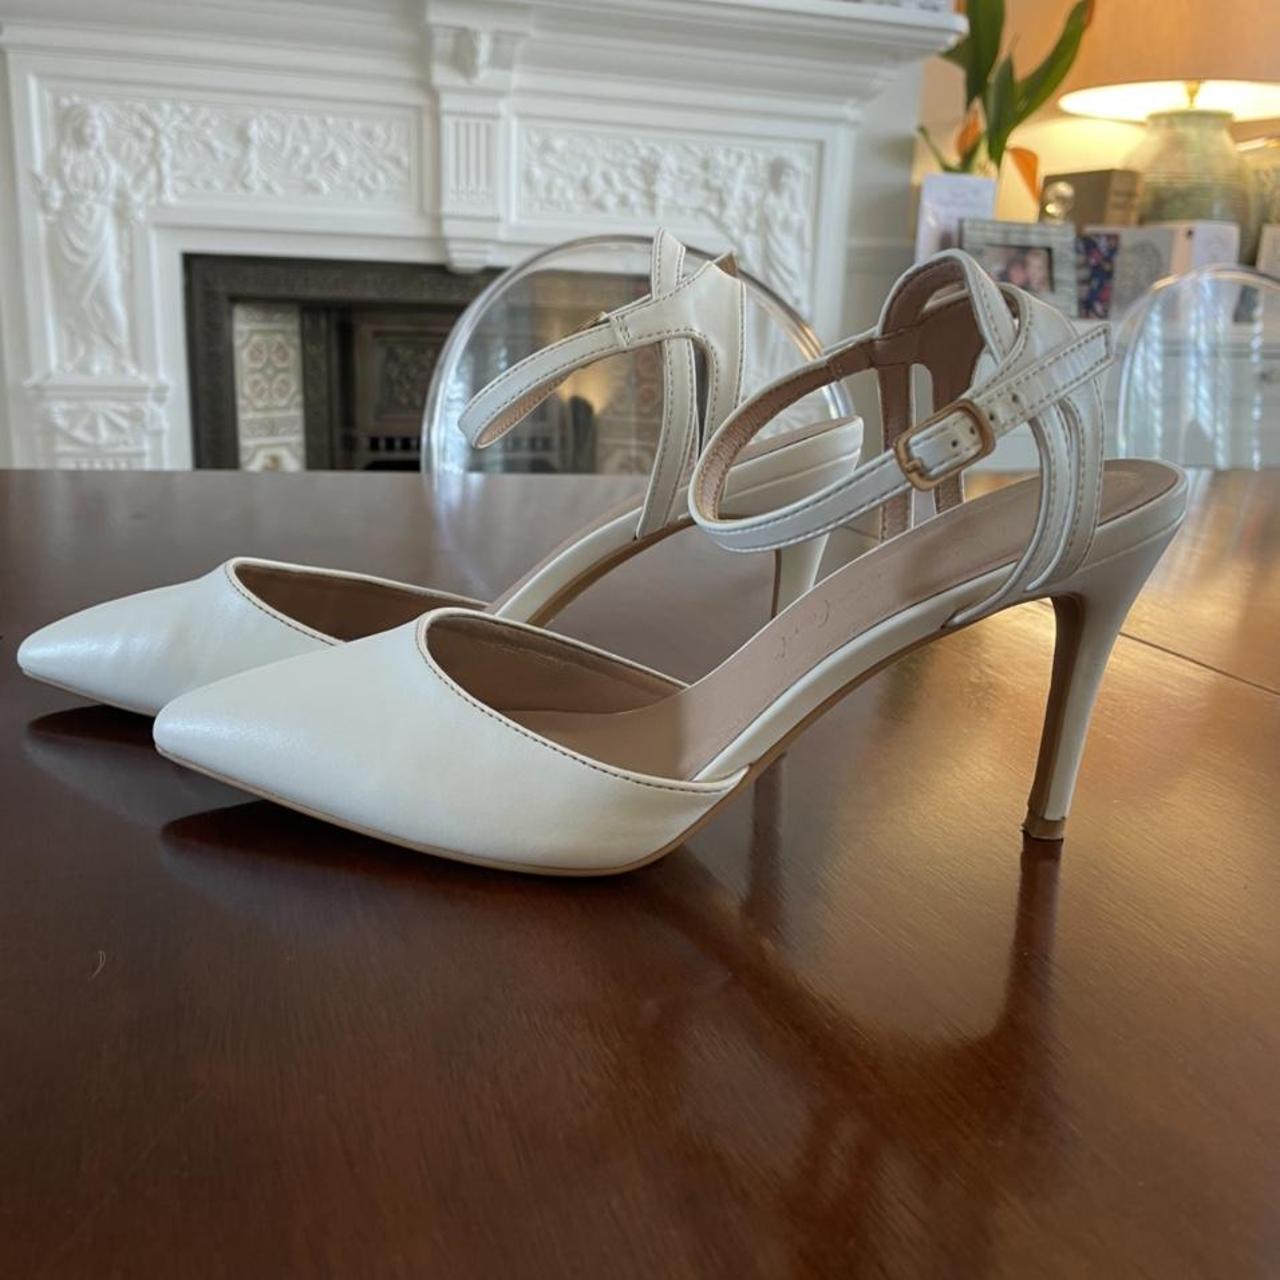 New Look Women's White Courts | Depop